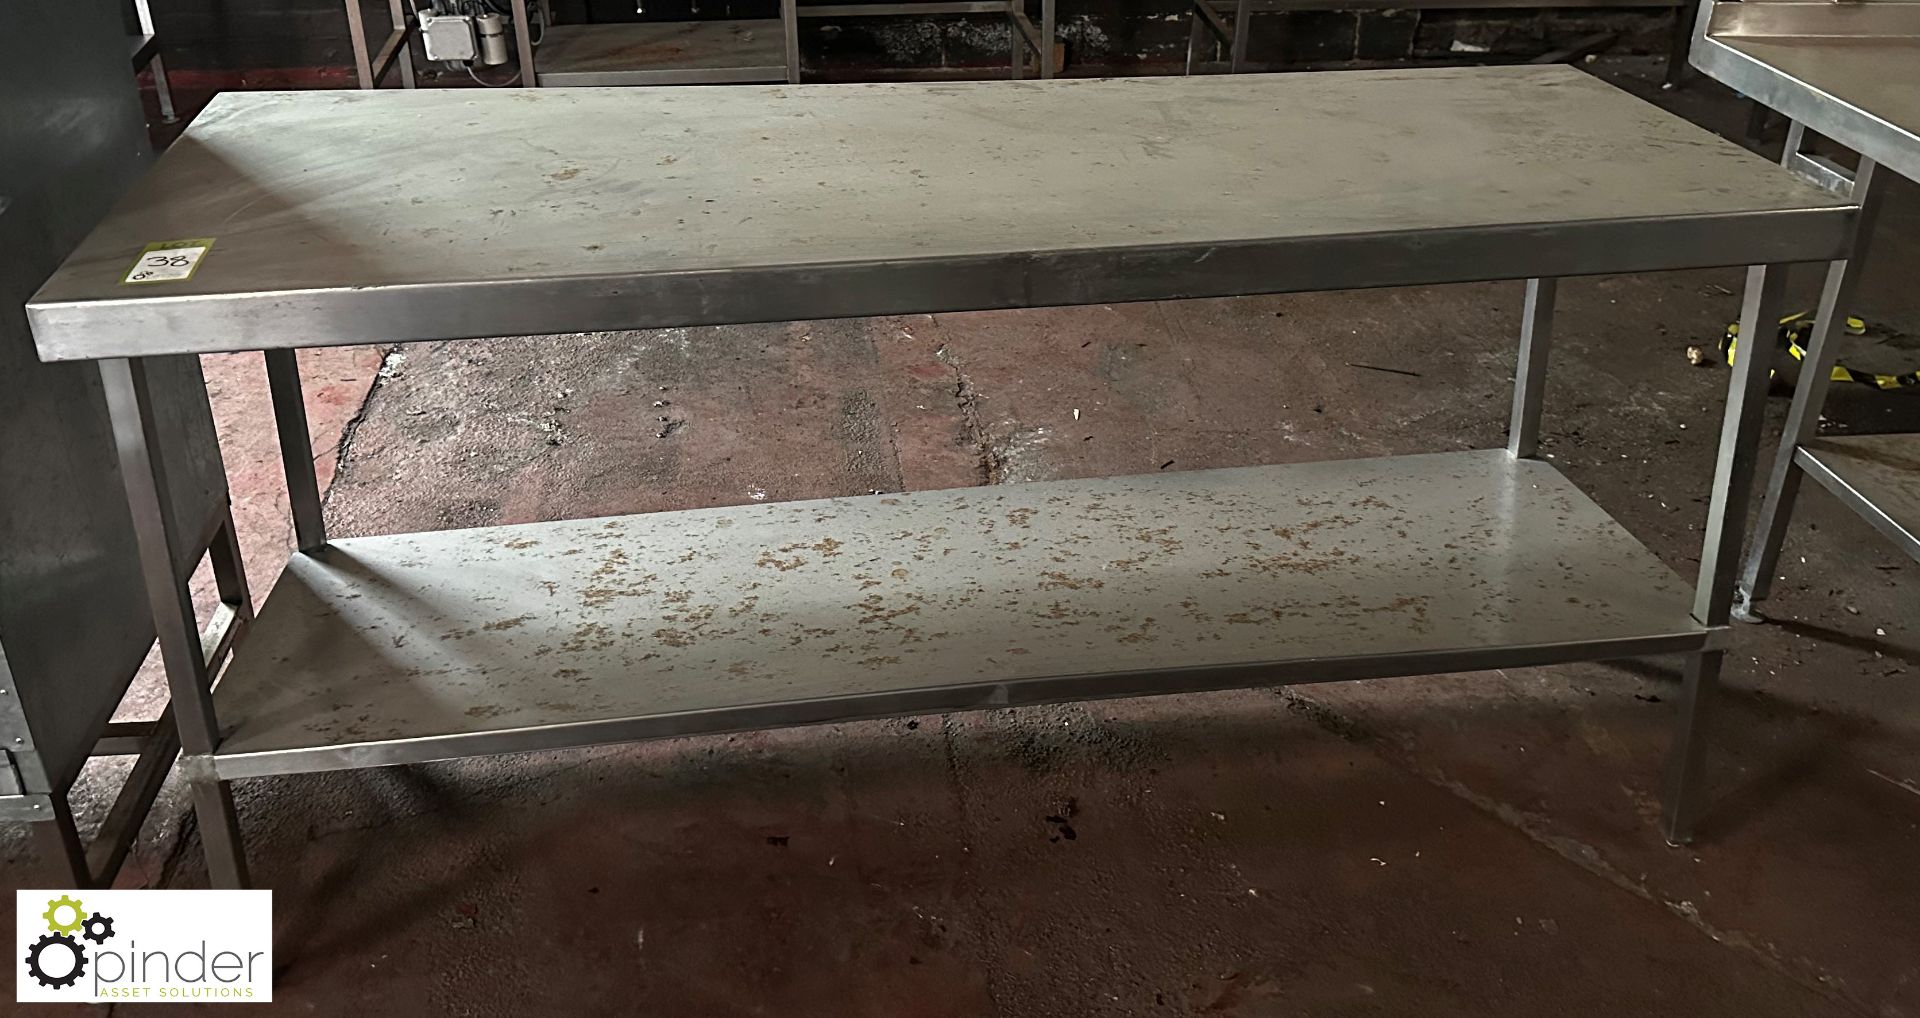 Stainless steel Preparation Table, 1800mm x 650mm x 880mm, with under shelf